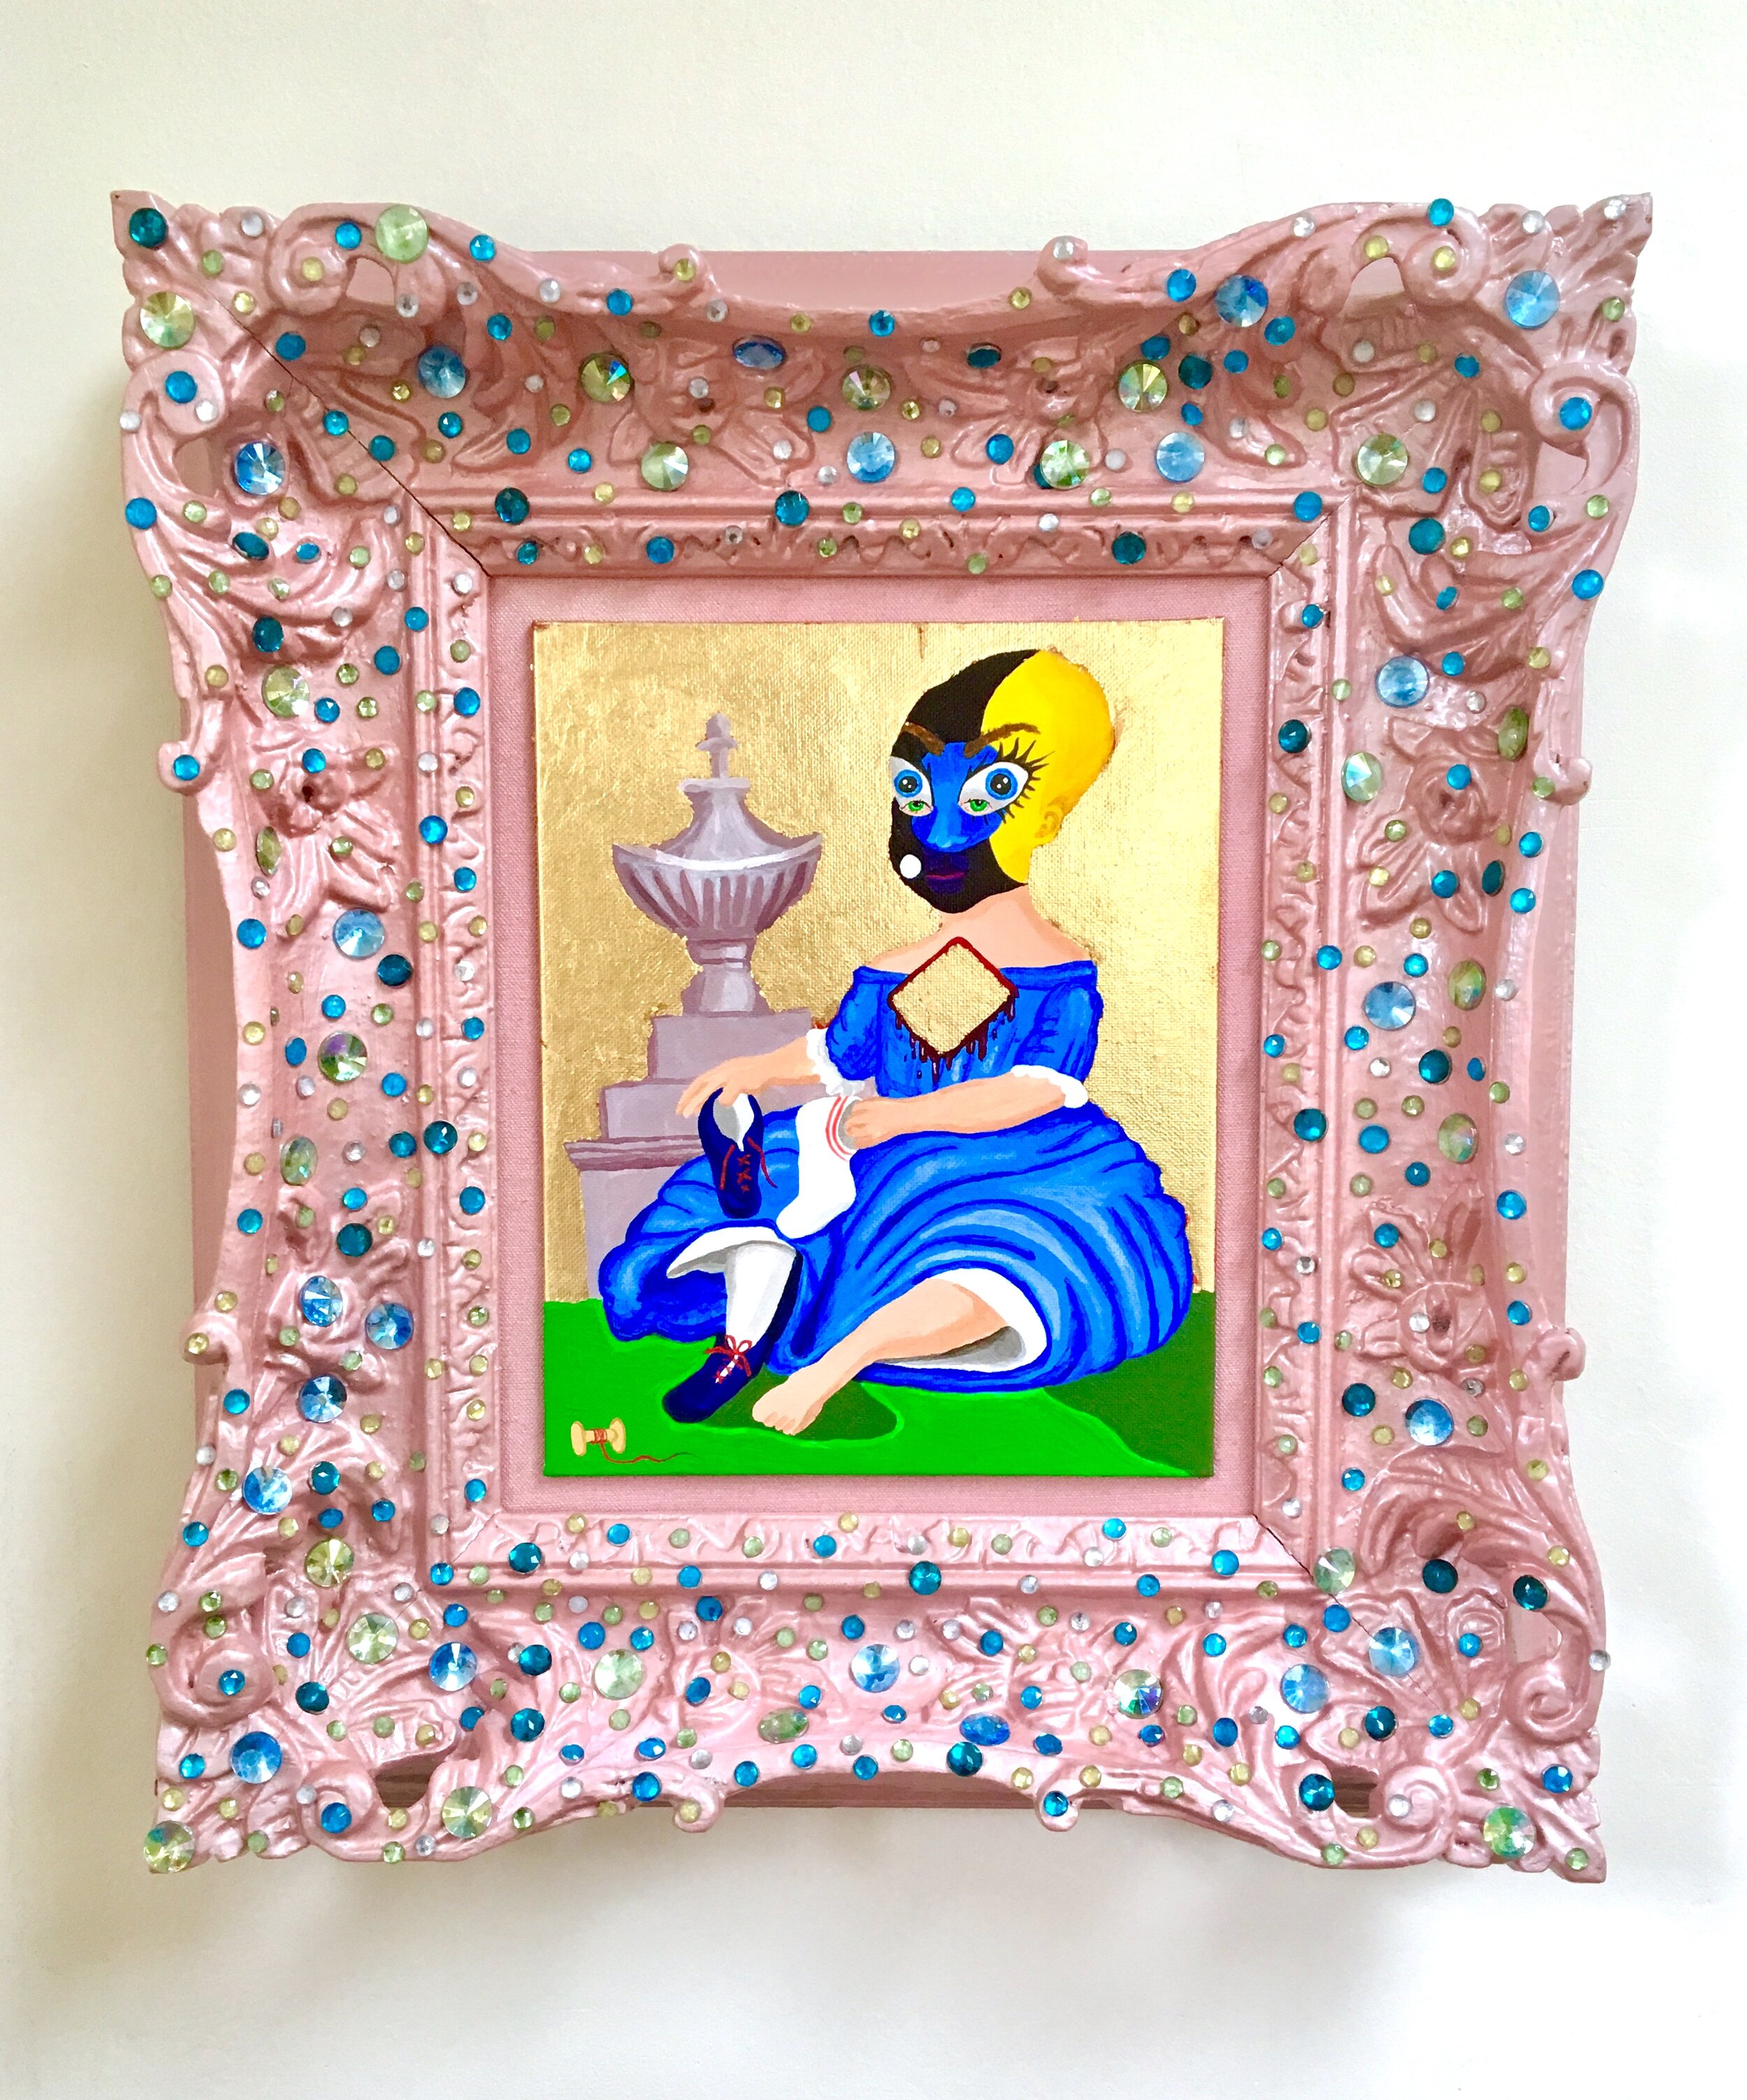   Baby with socks and Monument (The String of Life),  2018  10 x 8 inches with frame: 16 x 16 x 2.5 inches (40.64 x 40.64 cm.)  Acrylic and gold leaf on canvas board with artist’s embellished and painted antique frame  Private collection, Washington 